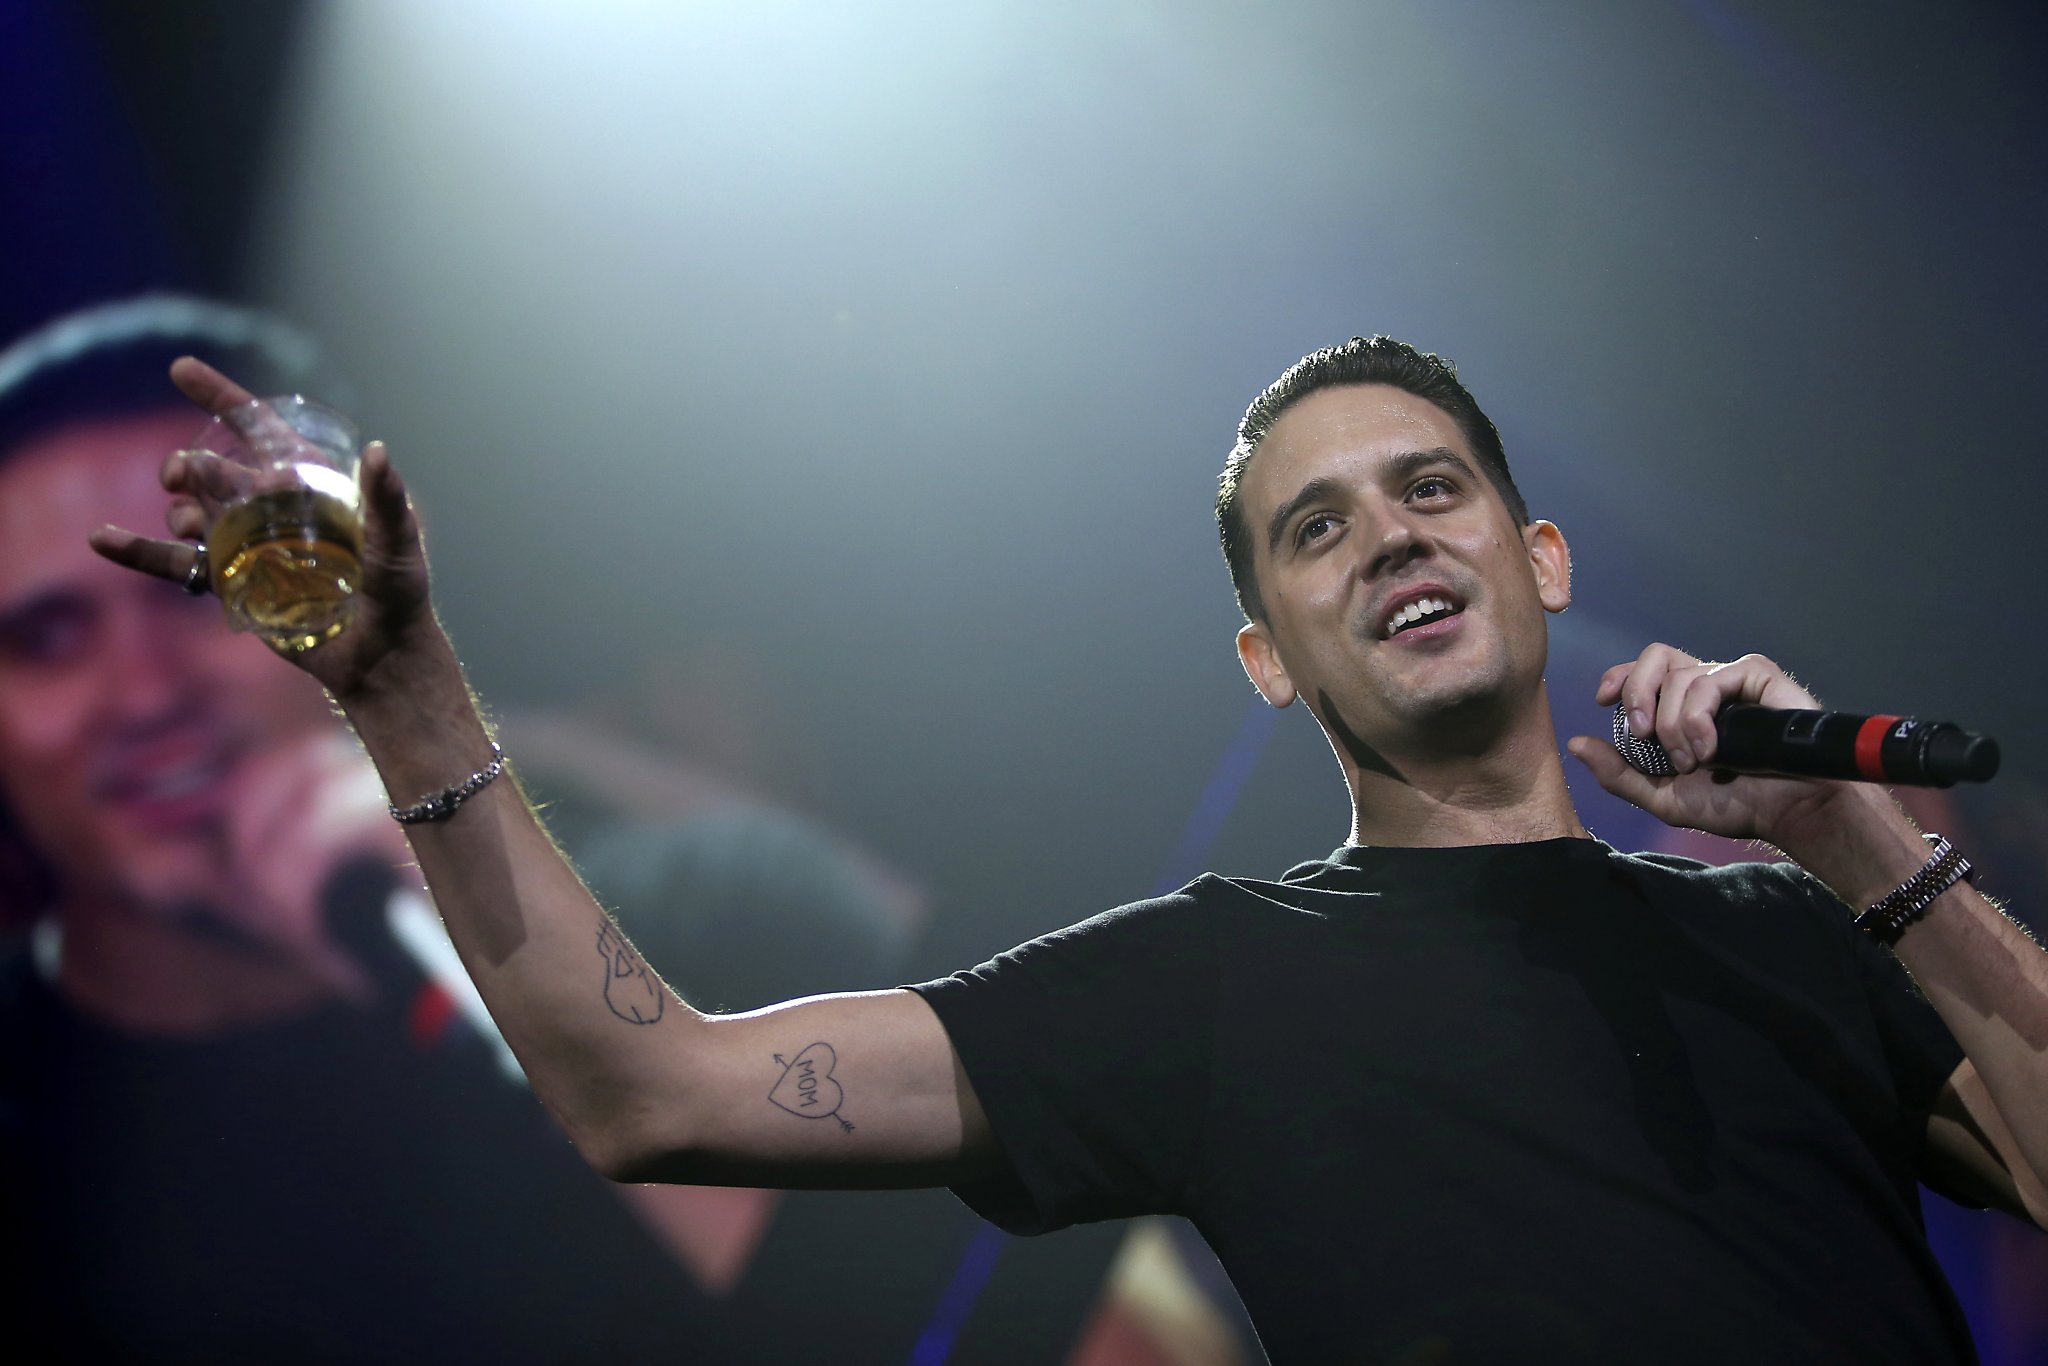 Hip Hop star G-Eazy joins Oakland Roots ownership group